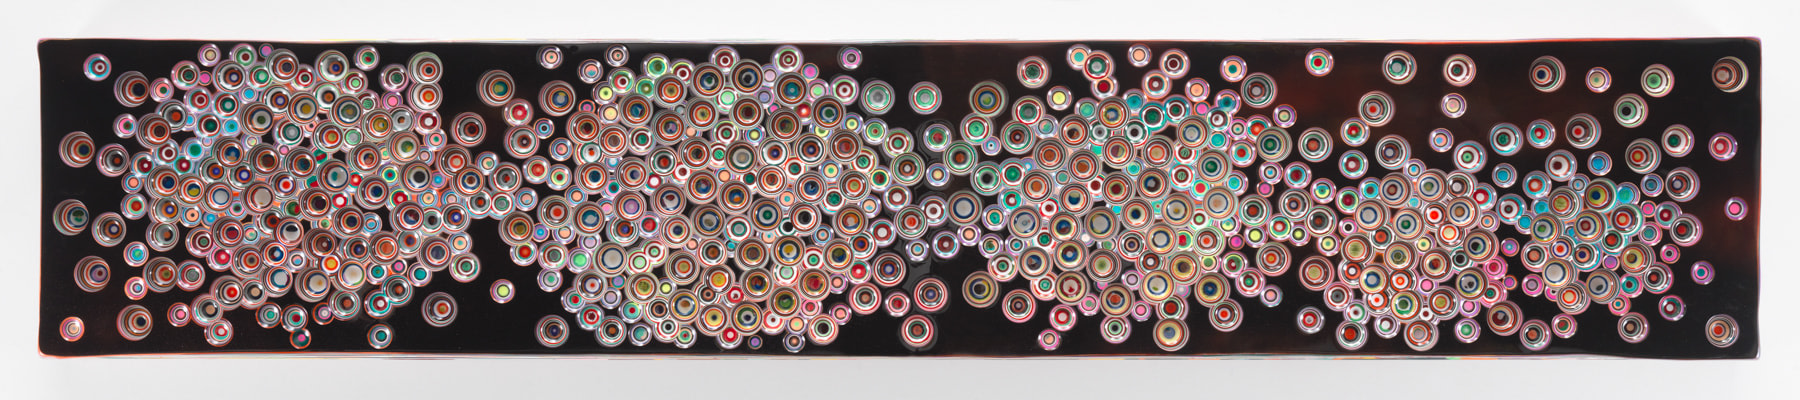 BOYWITHSCHATZITUDE, 2016, Epoxy resin and pigments on wood, 18 x 96 inches, 45.7 x 243.8 cm, AMY#28439